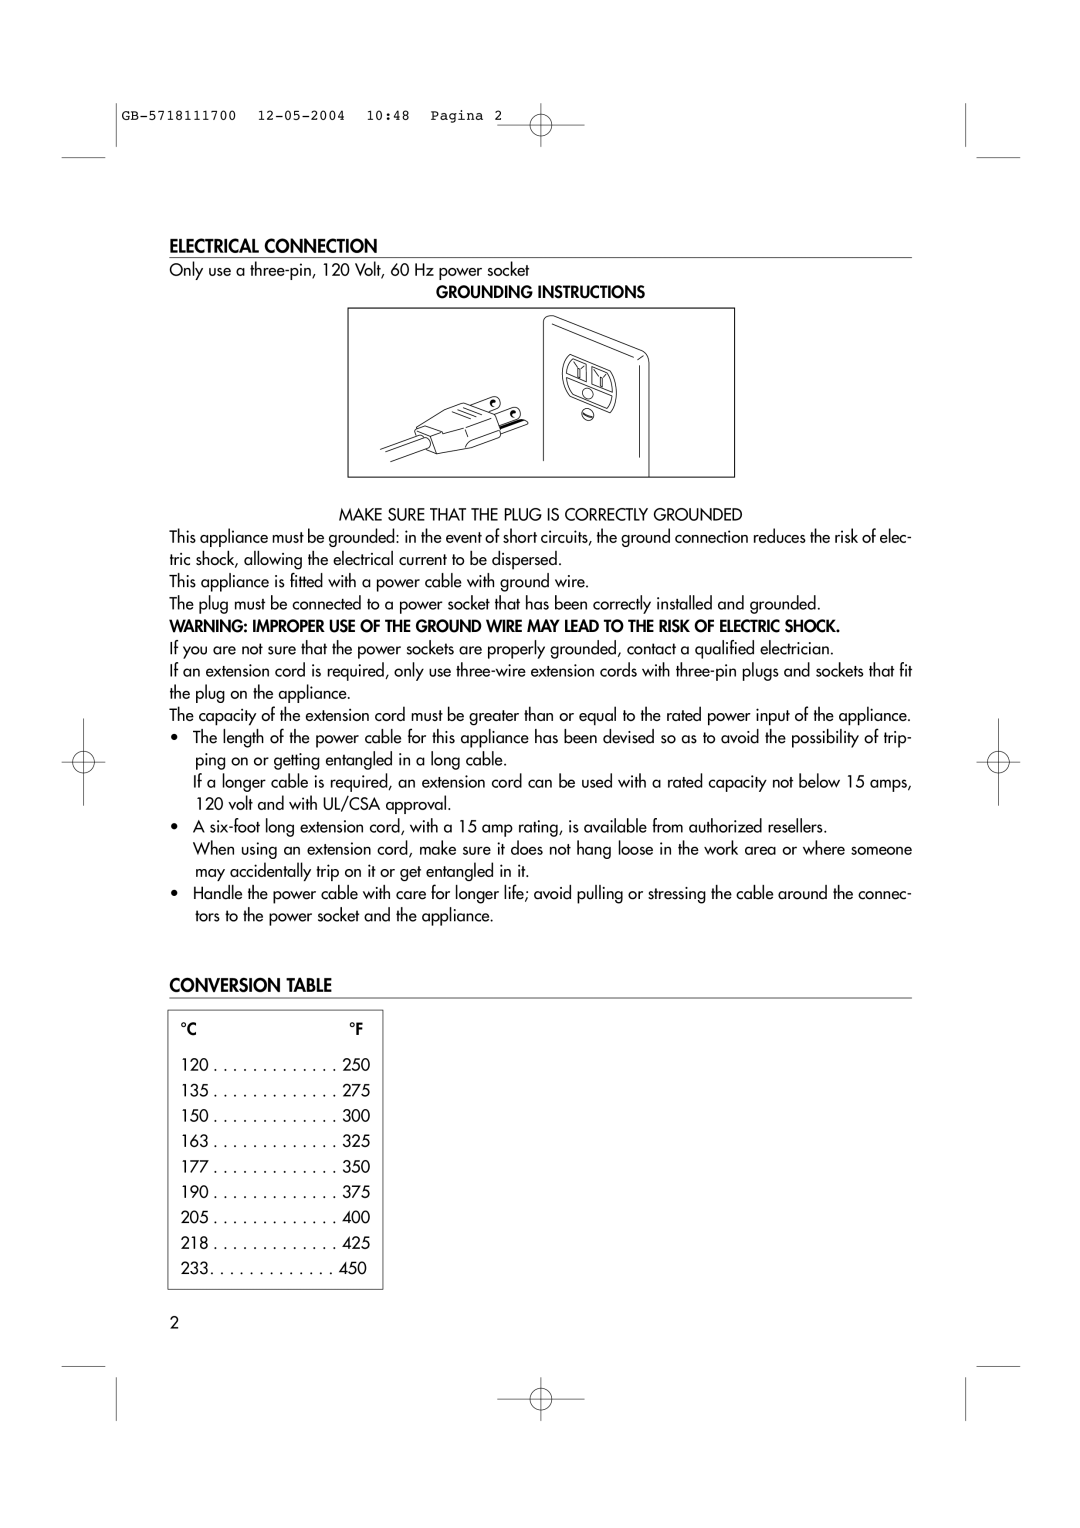 DeLonghi EO1200 Series manual Electrical Connection, Conversion Table 